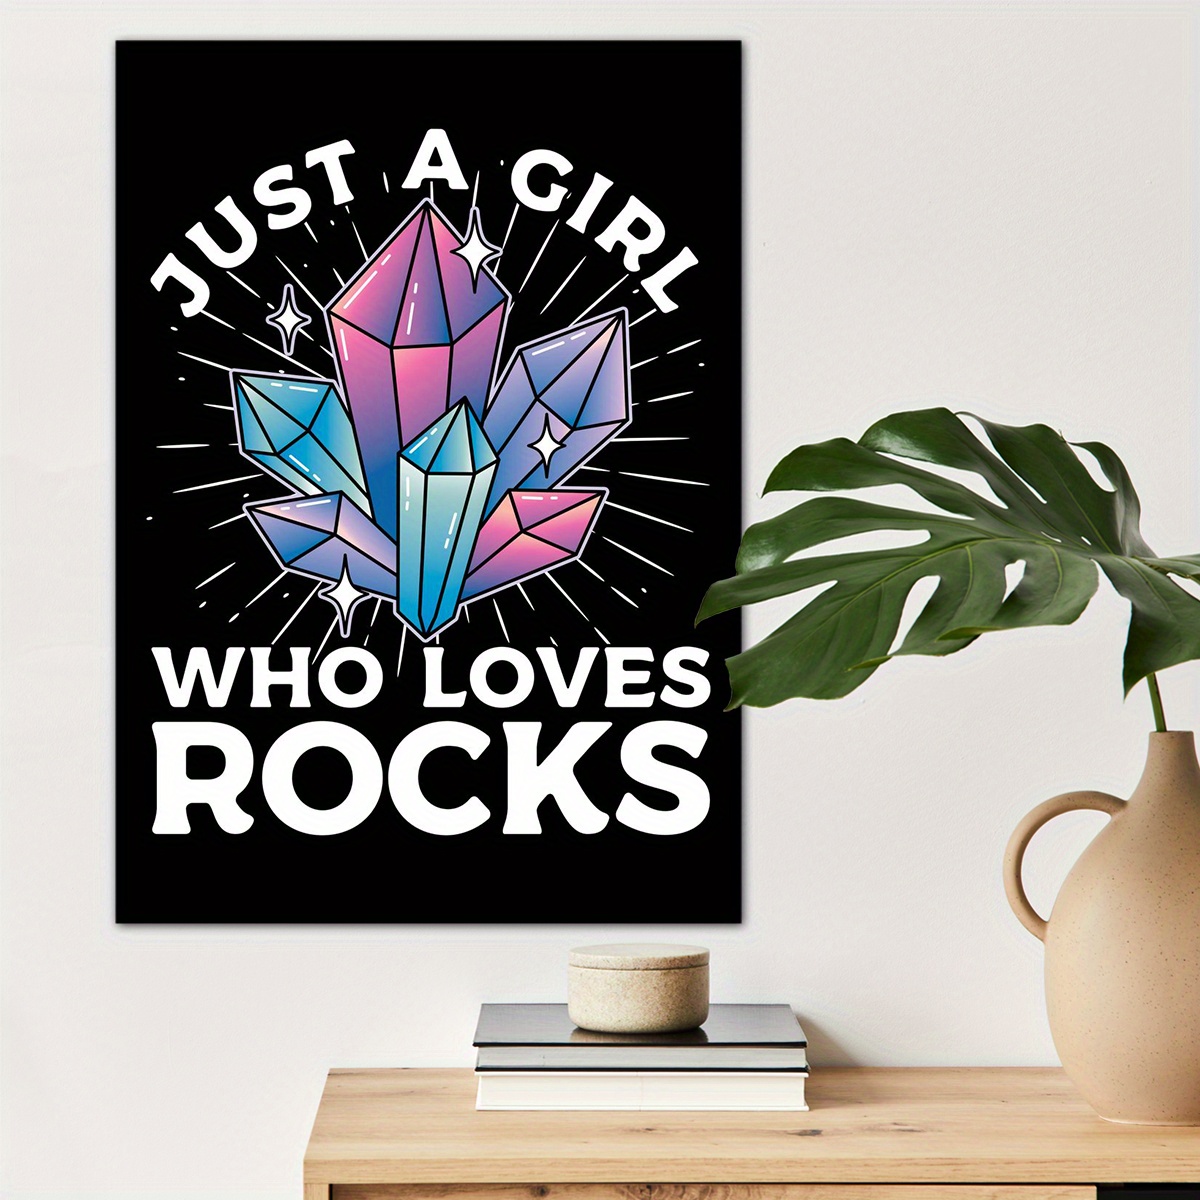 

1pc Rock Hunting Poster Canvas Wall Art For Home Decor, Diamond Lovers Poster Wall Decor High Quality Canvas Prints For Living Room Bedroom Kitchen Office Cafe Decor, Perfect Gift And Decoration